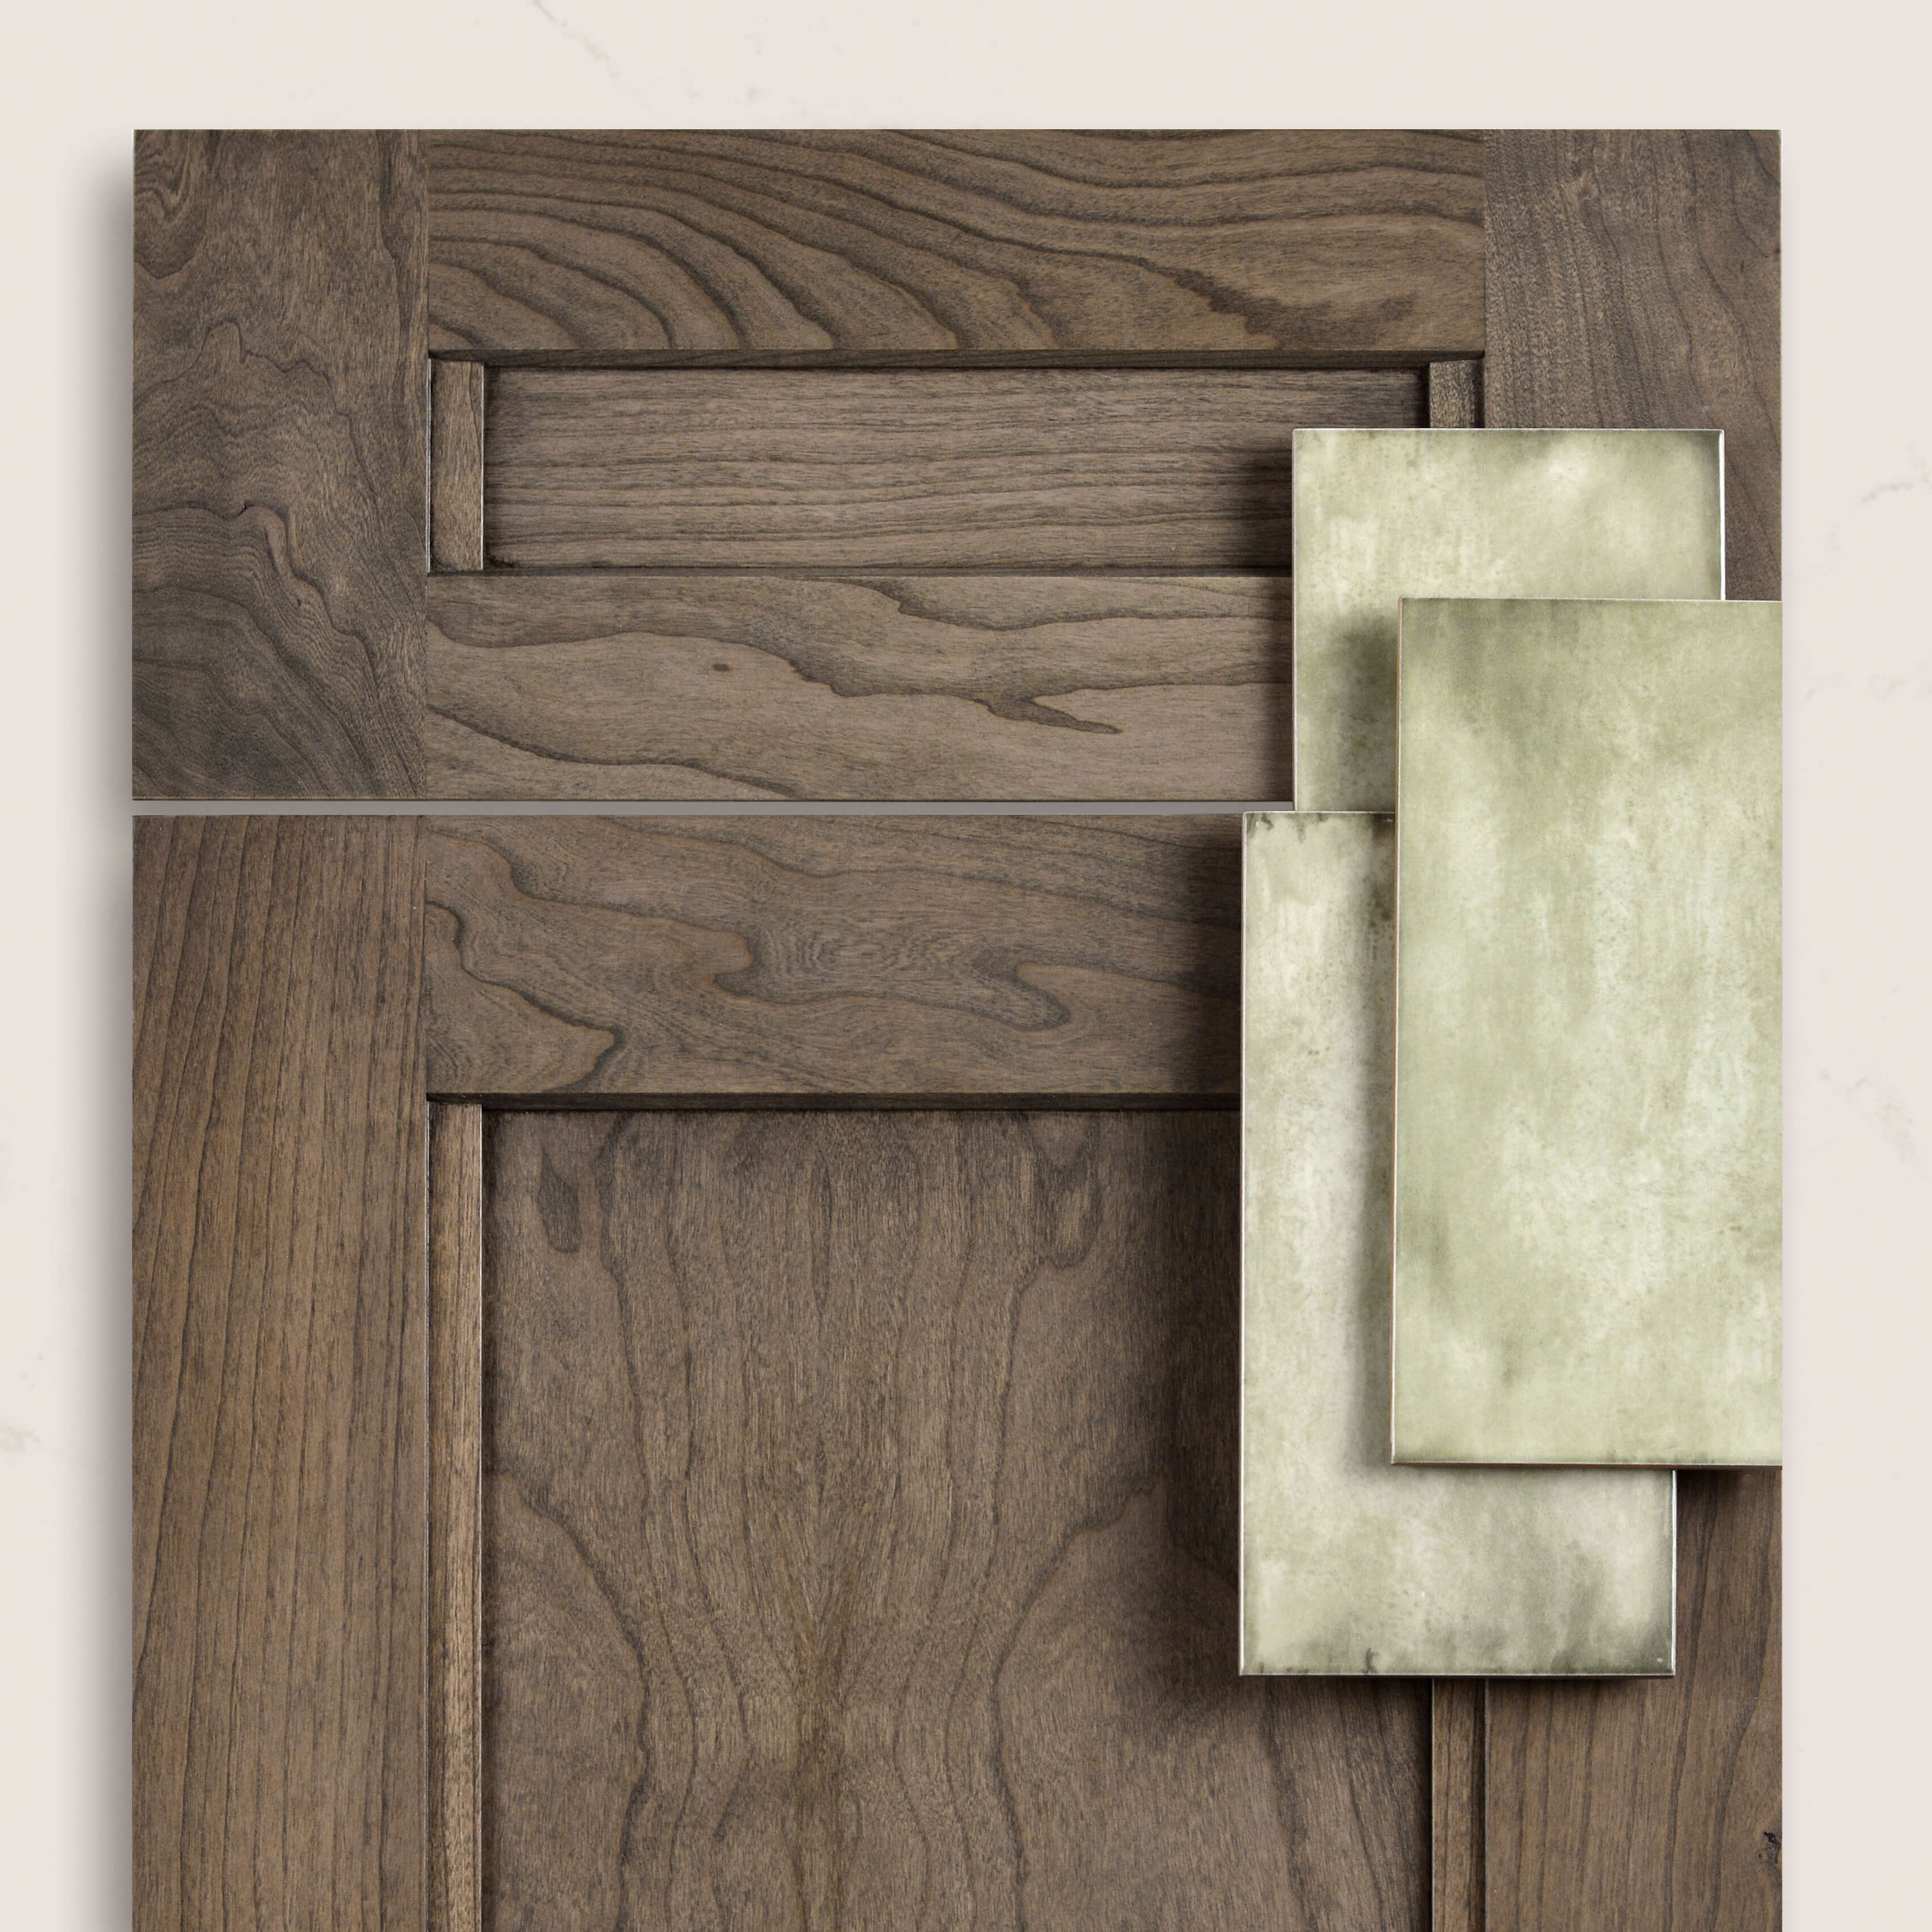 Dura Supreme Avery door style in Cherry with a Harbor stain.